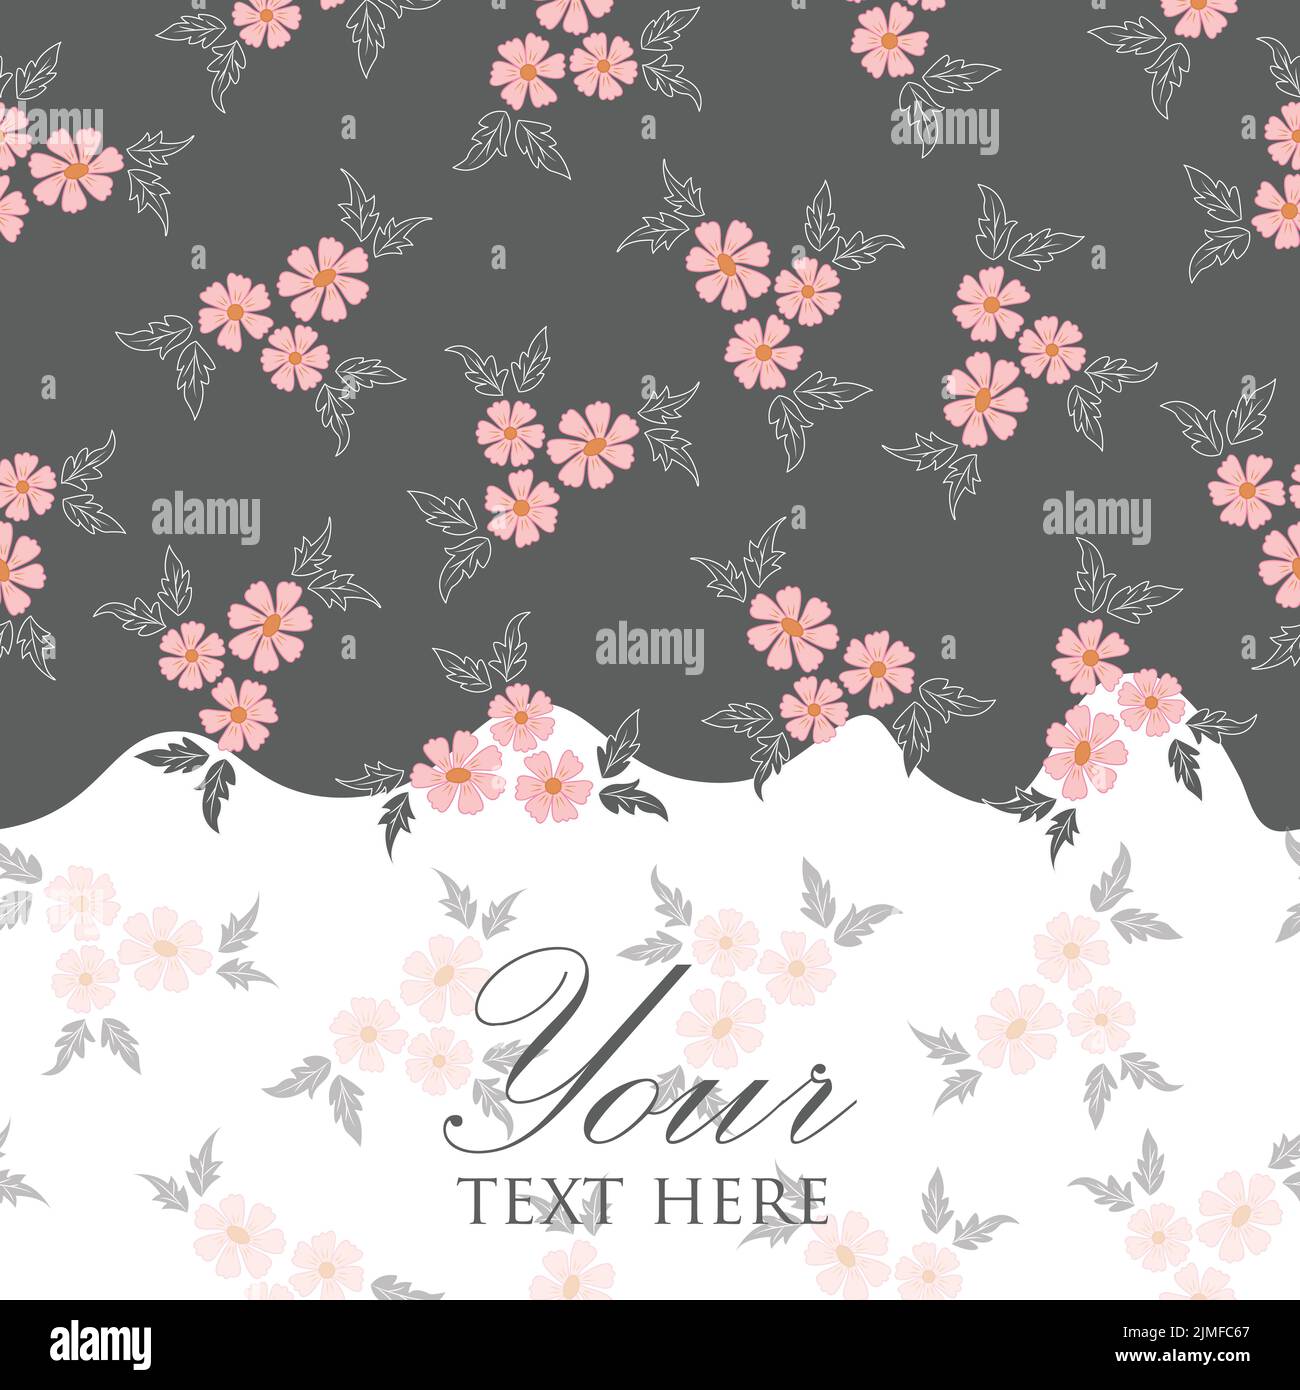 Vector trendy pink floral ditsy on grey white ground horizontal seamless border pattern background Stock Vector